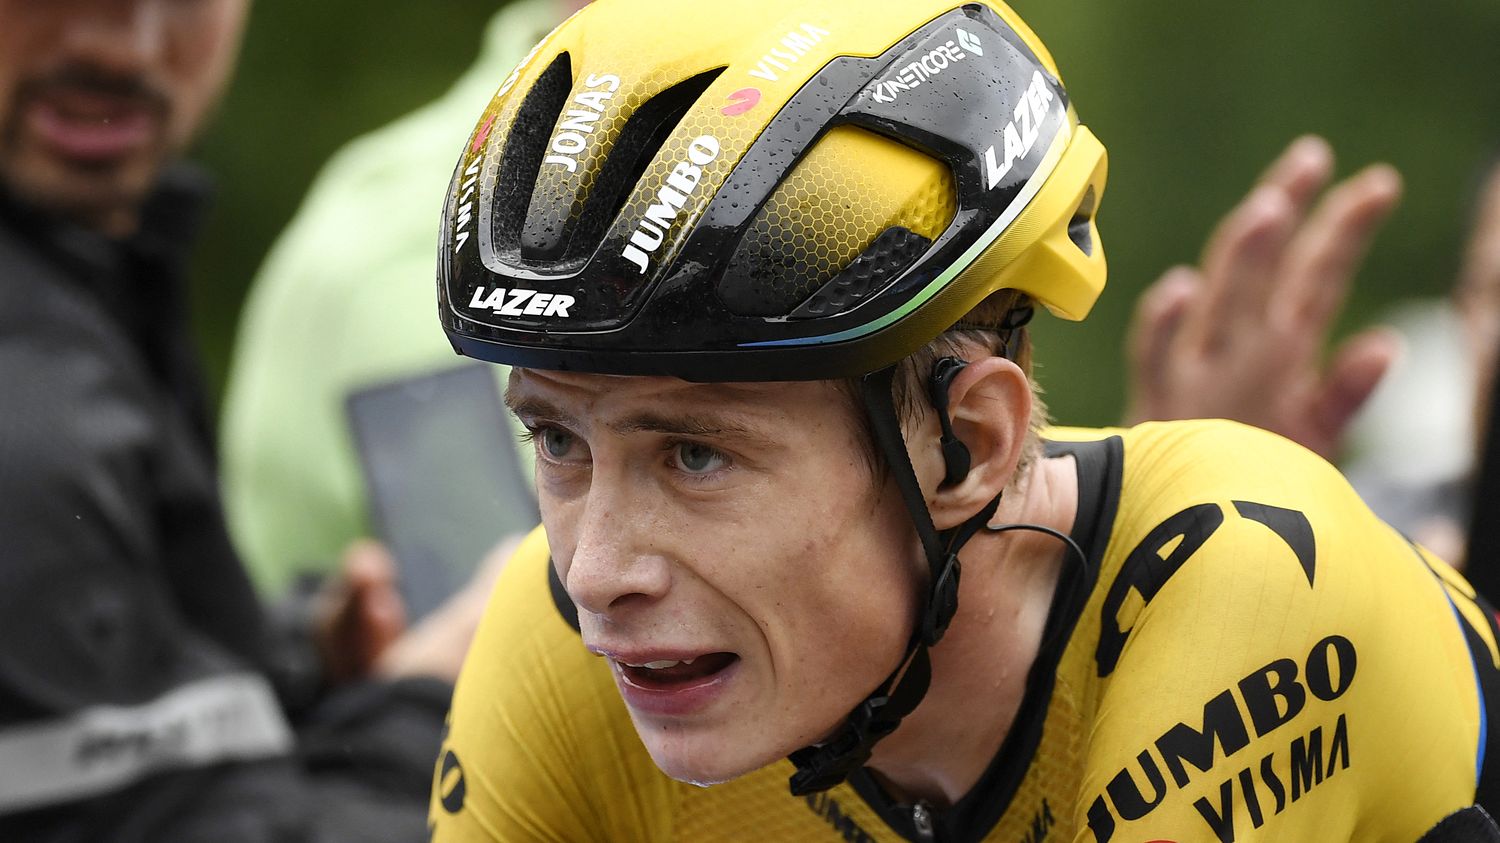 Cycling: Jonas Vingegaard is also suffering from lung damage and pneumothorax after a heavy crash in the Basque Country